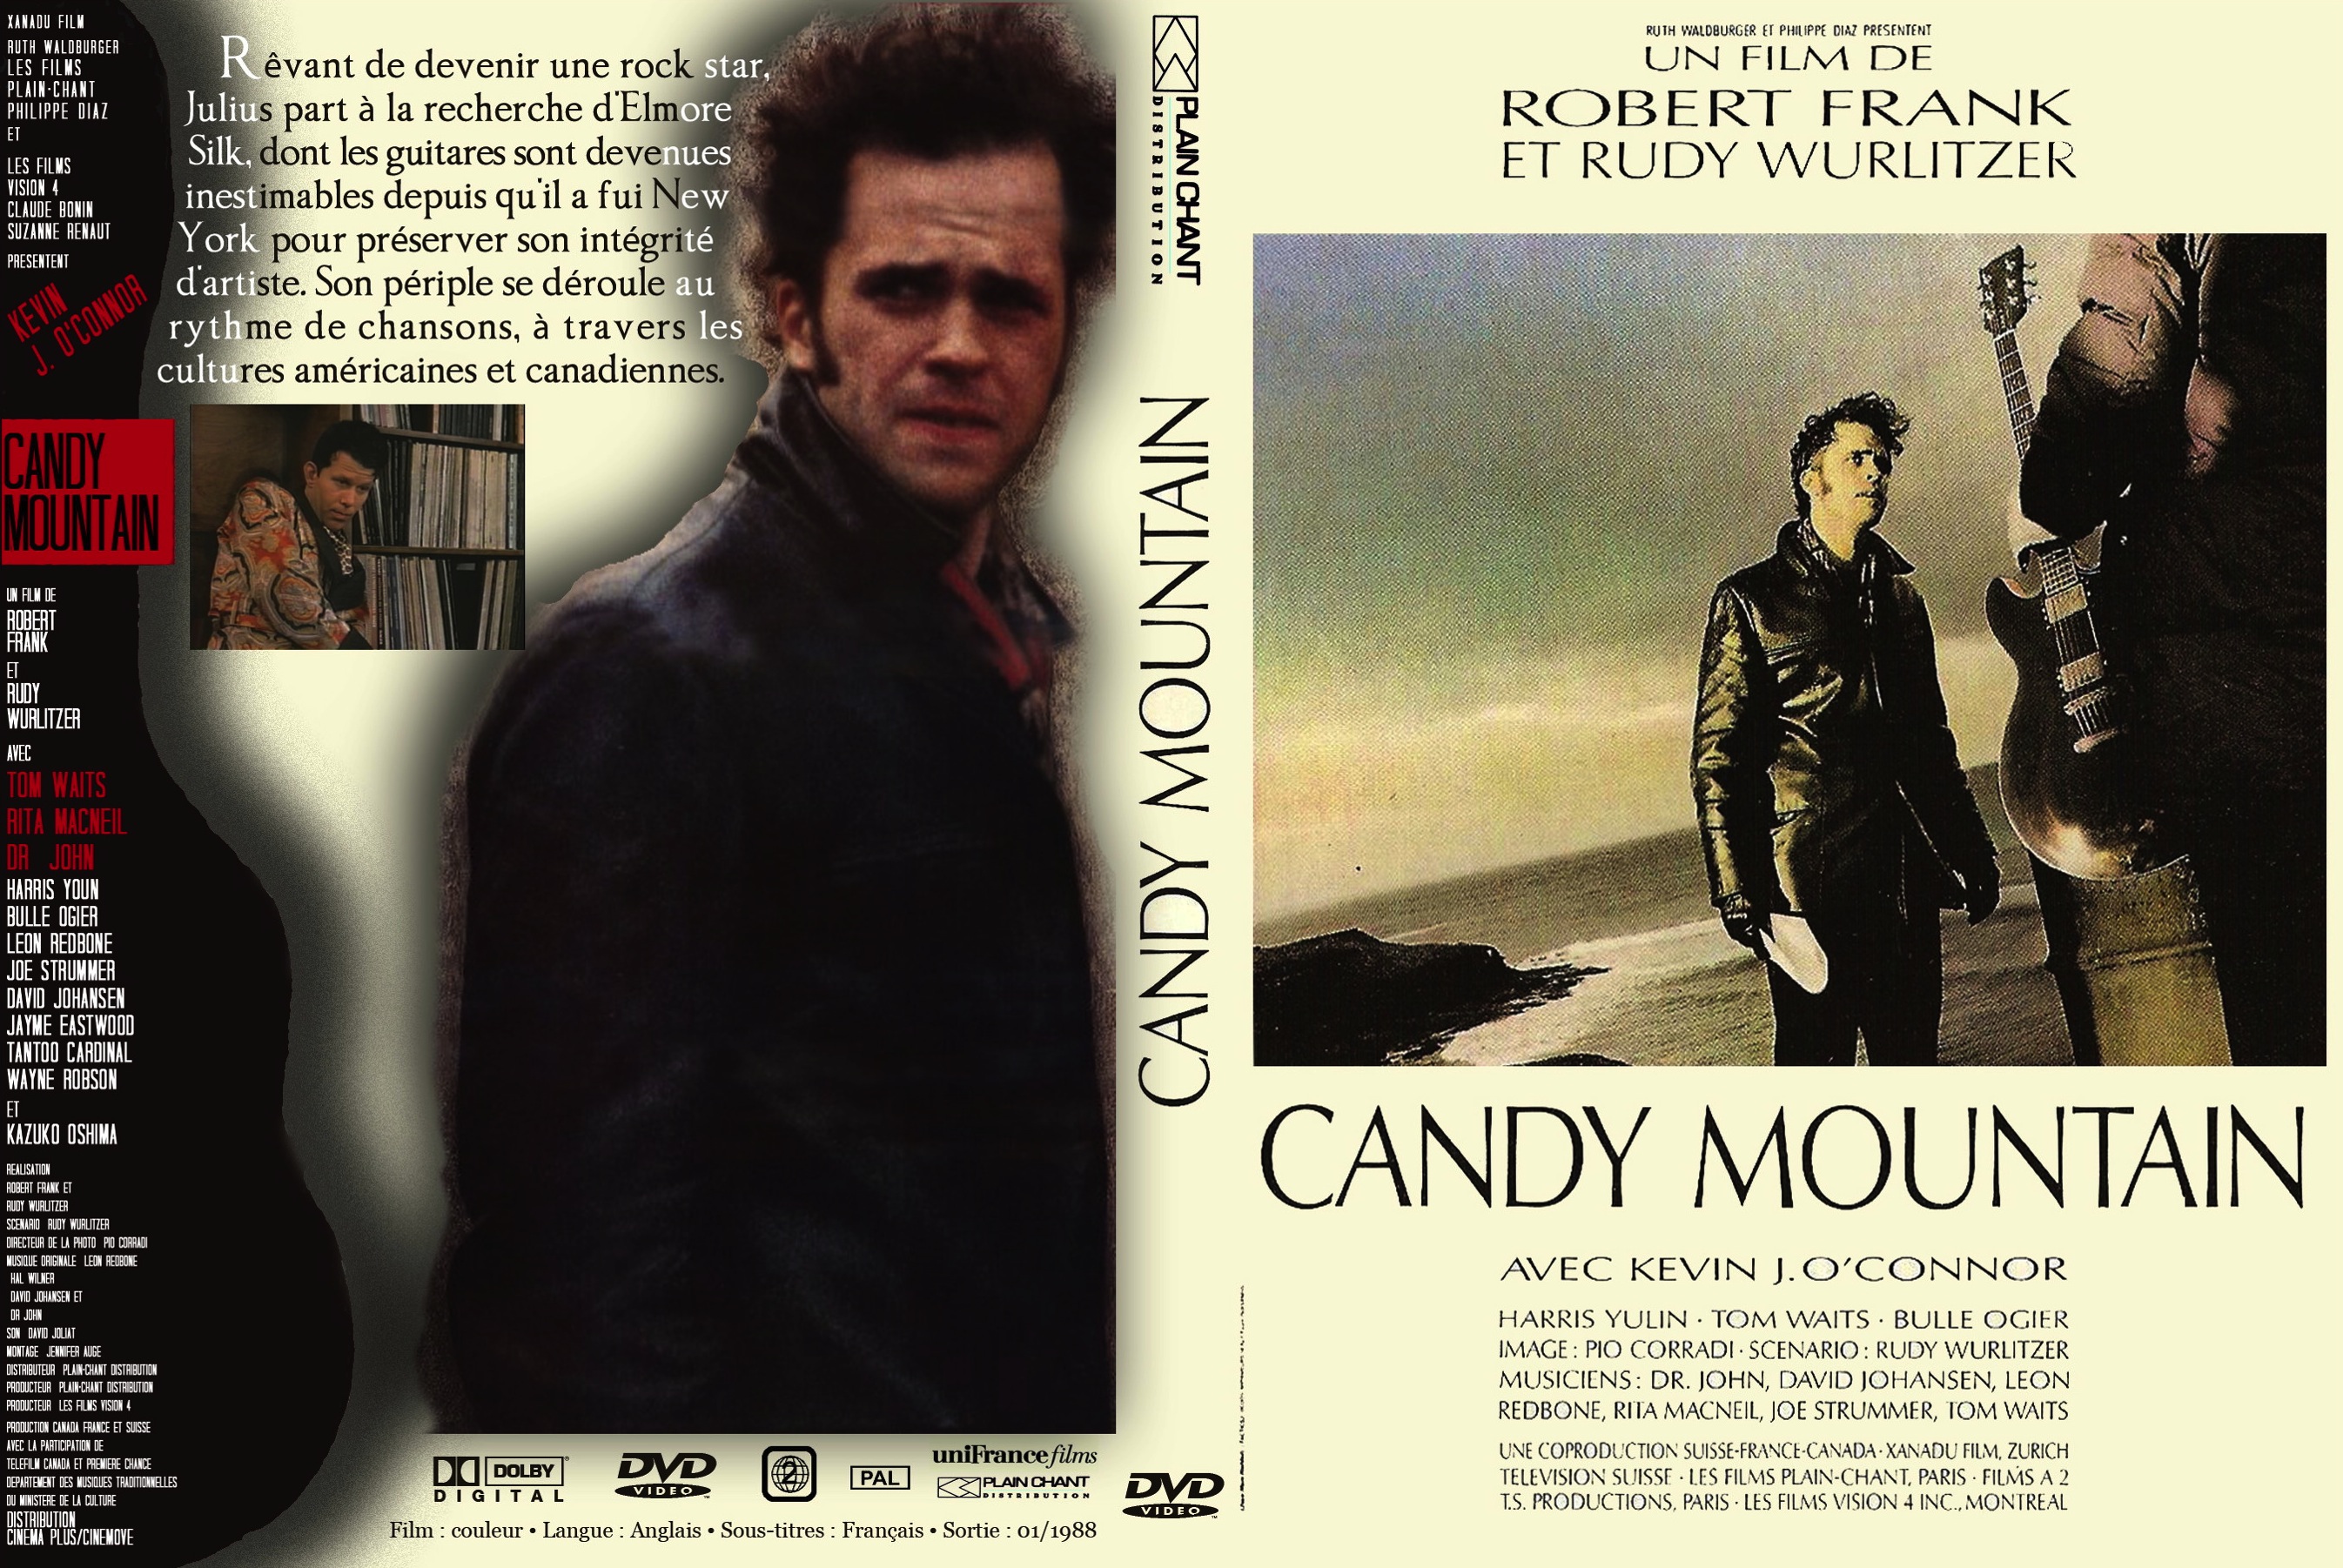 Jaquette DVD Candy Mountain custom